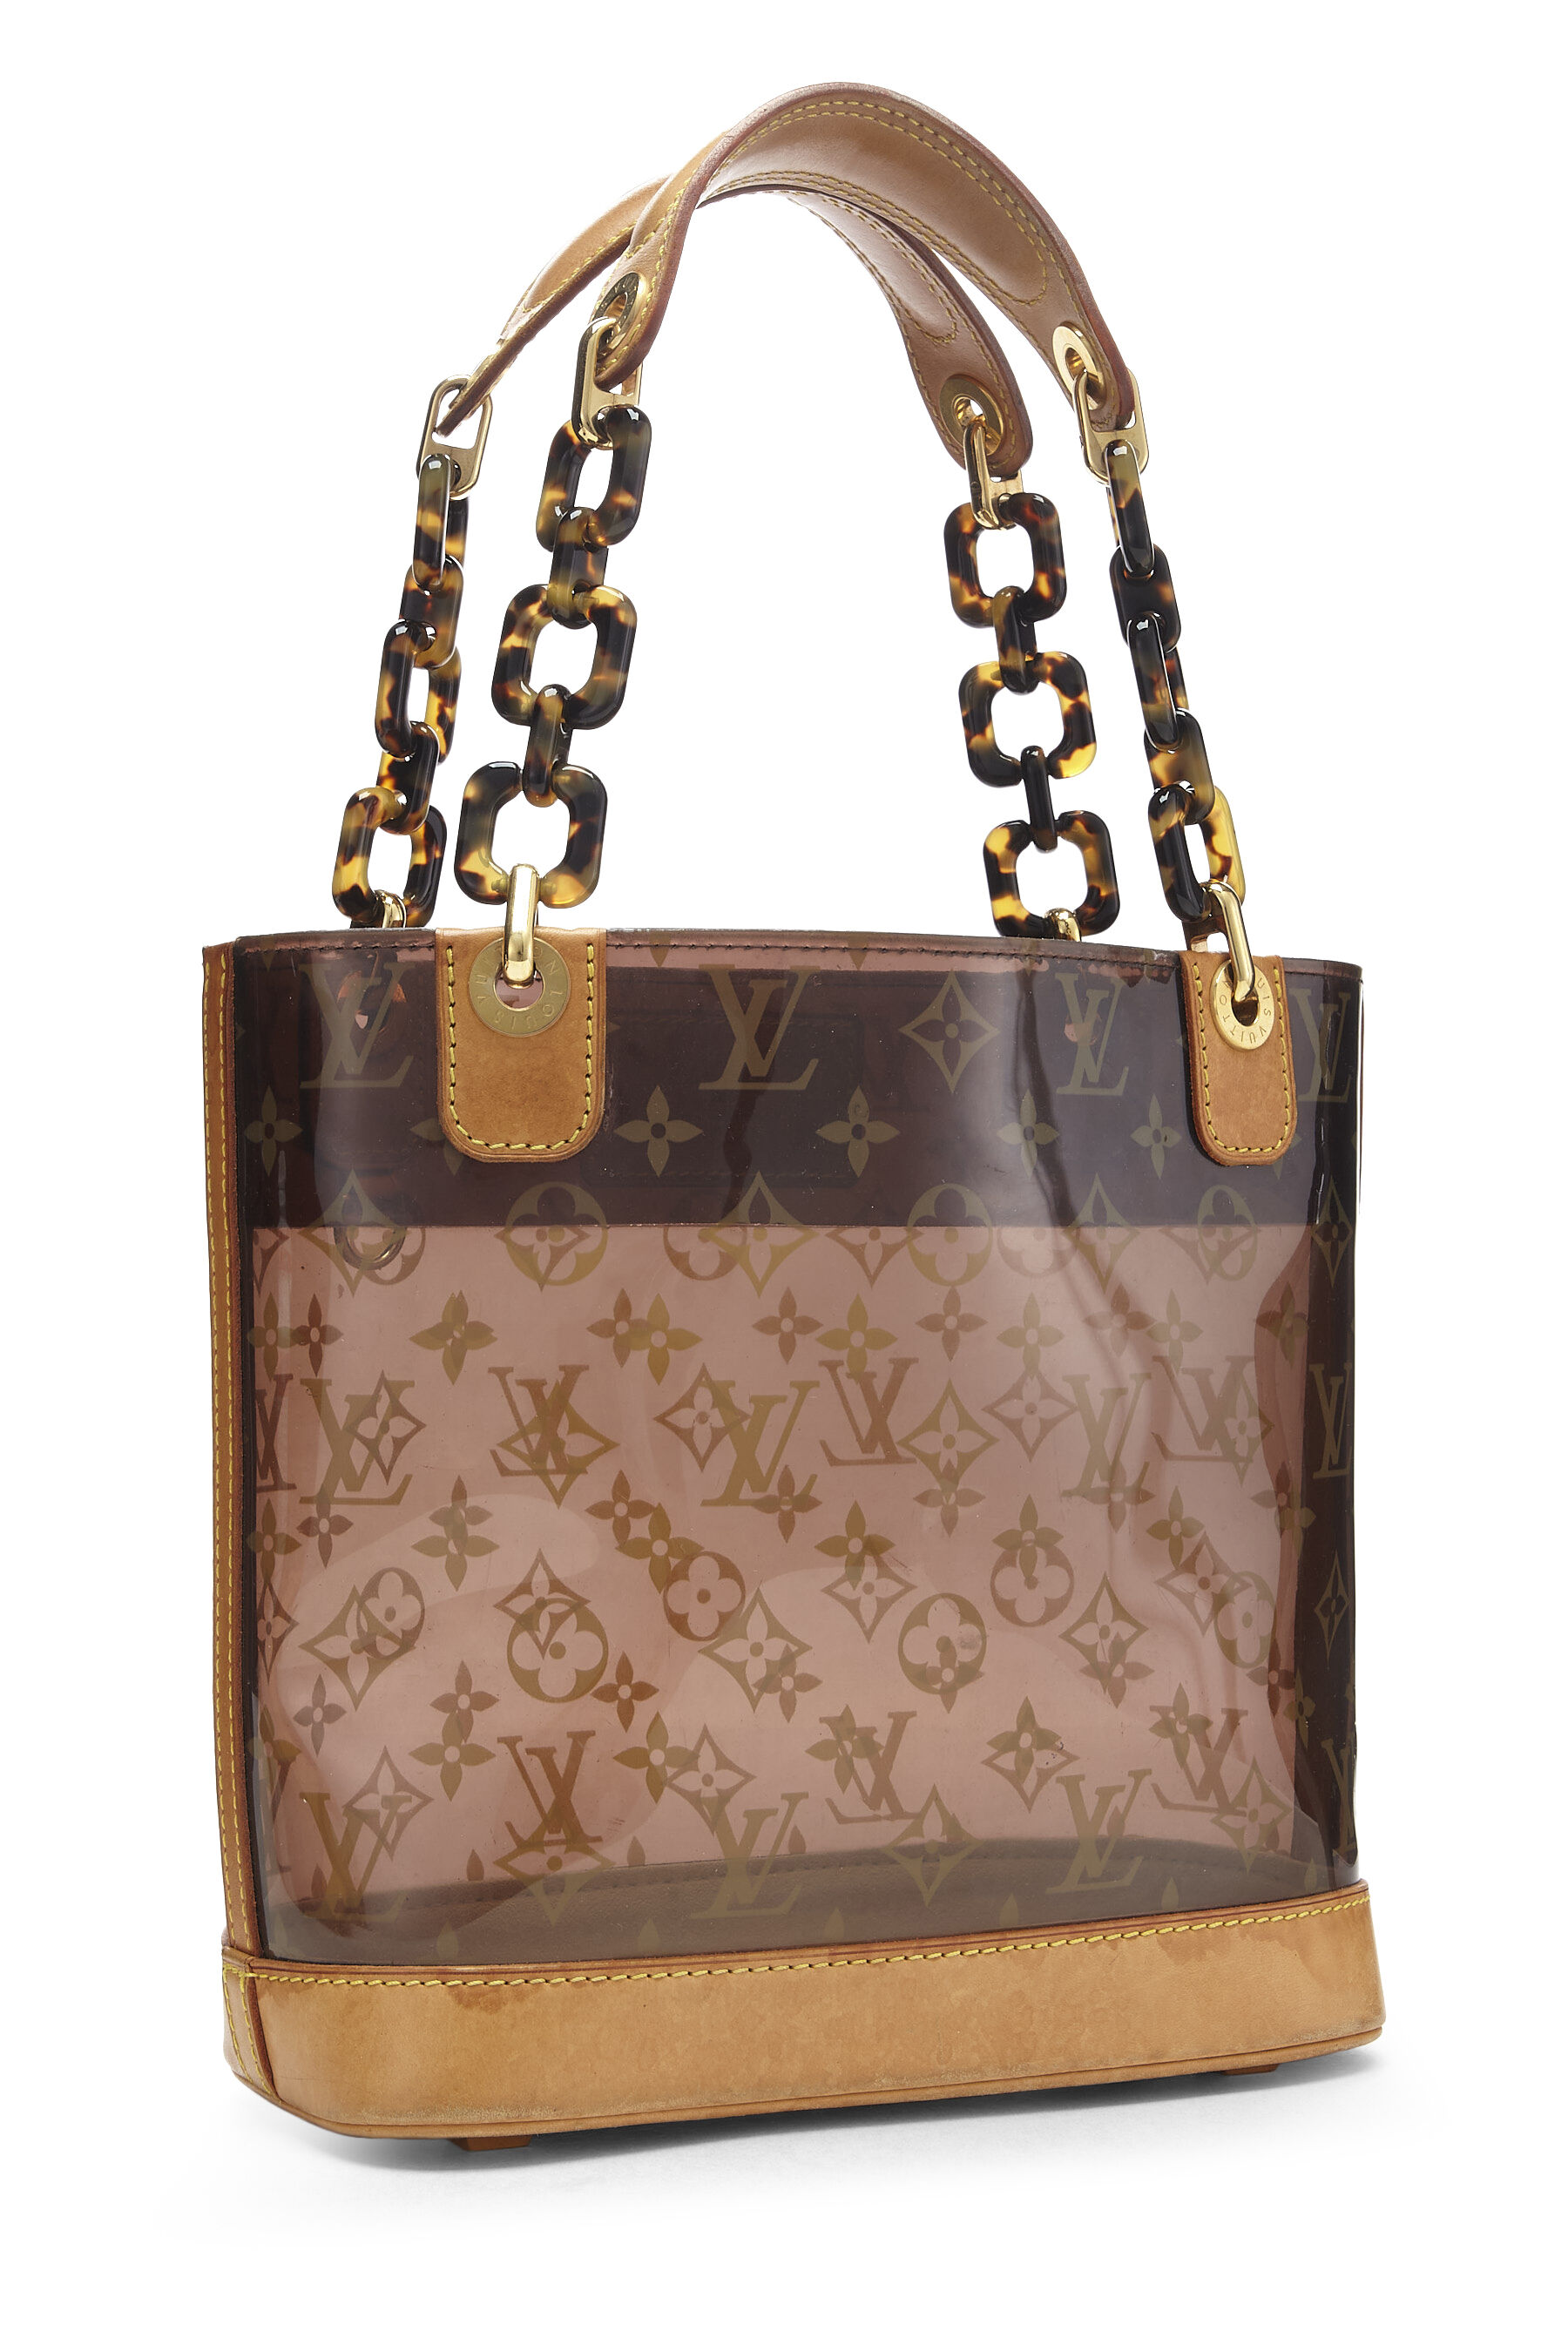 Sold at Auction: LOUIS VUITTON LV MONOGRAM CABAS AMBRE VINYL TOTE LOUIS VUITTON  LV MONOGRAM CABAS AMBRE VINYL, TOTE BAG MEASURES APPROX 13 TALL X 14  WIDE.TORTOISE-SHELL STYLE LINK STRAPS.; NOTE BSAG